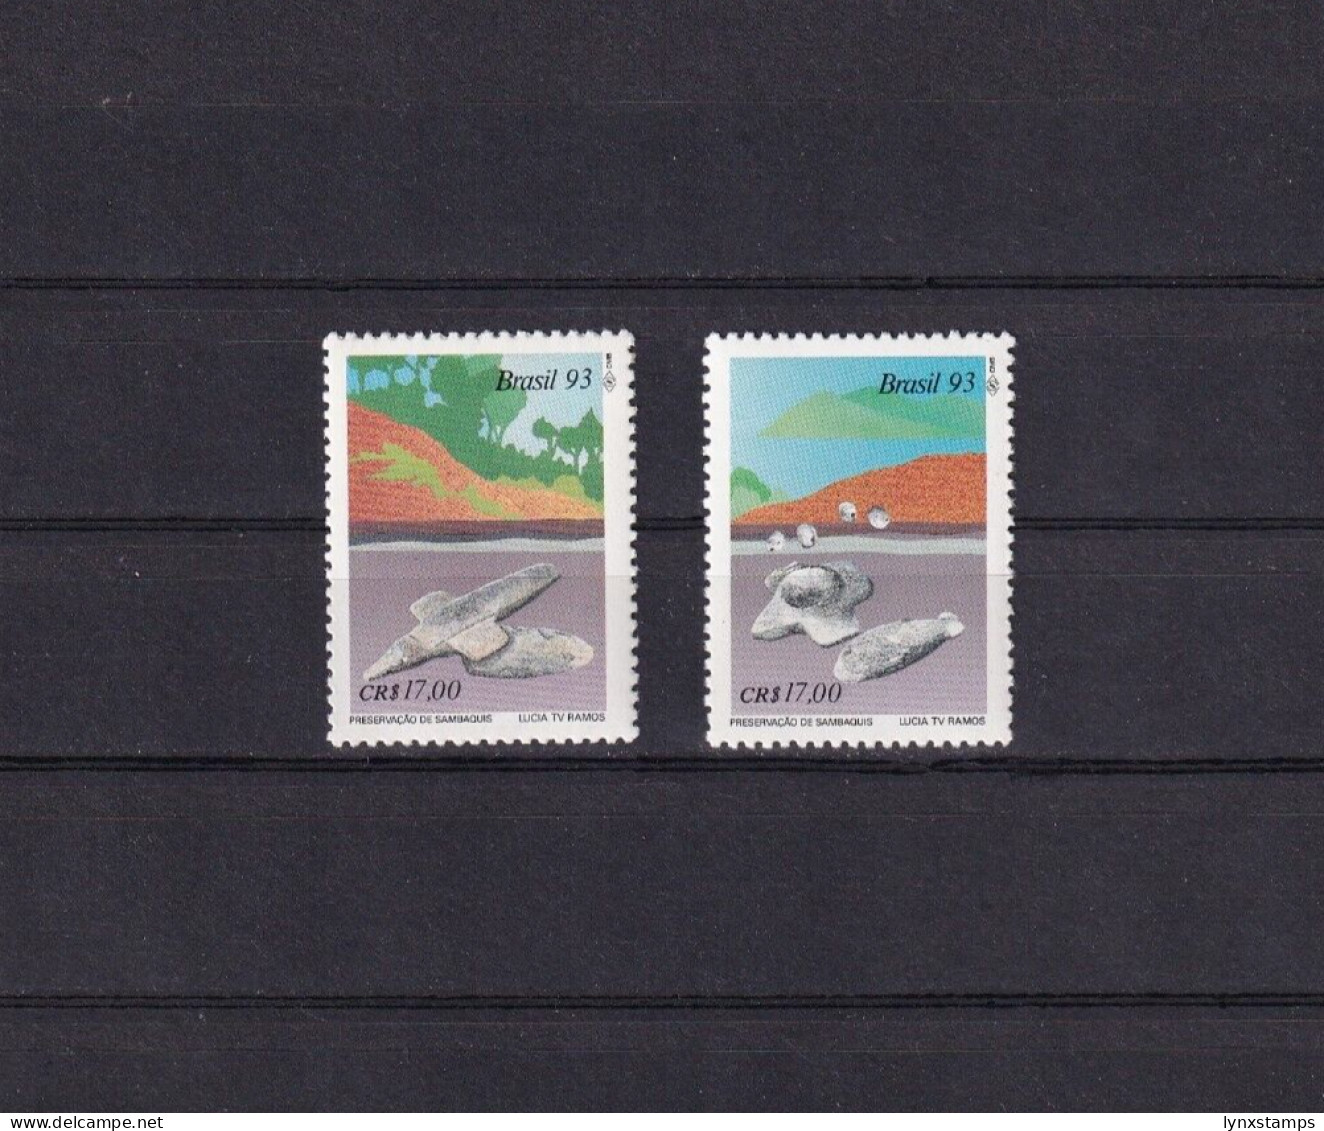 SA06 Brazil 1993 Preservation Of Archaeological Sites Mint Stamps - Unused Stamps